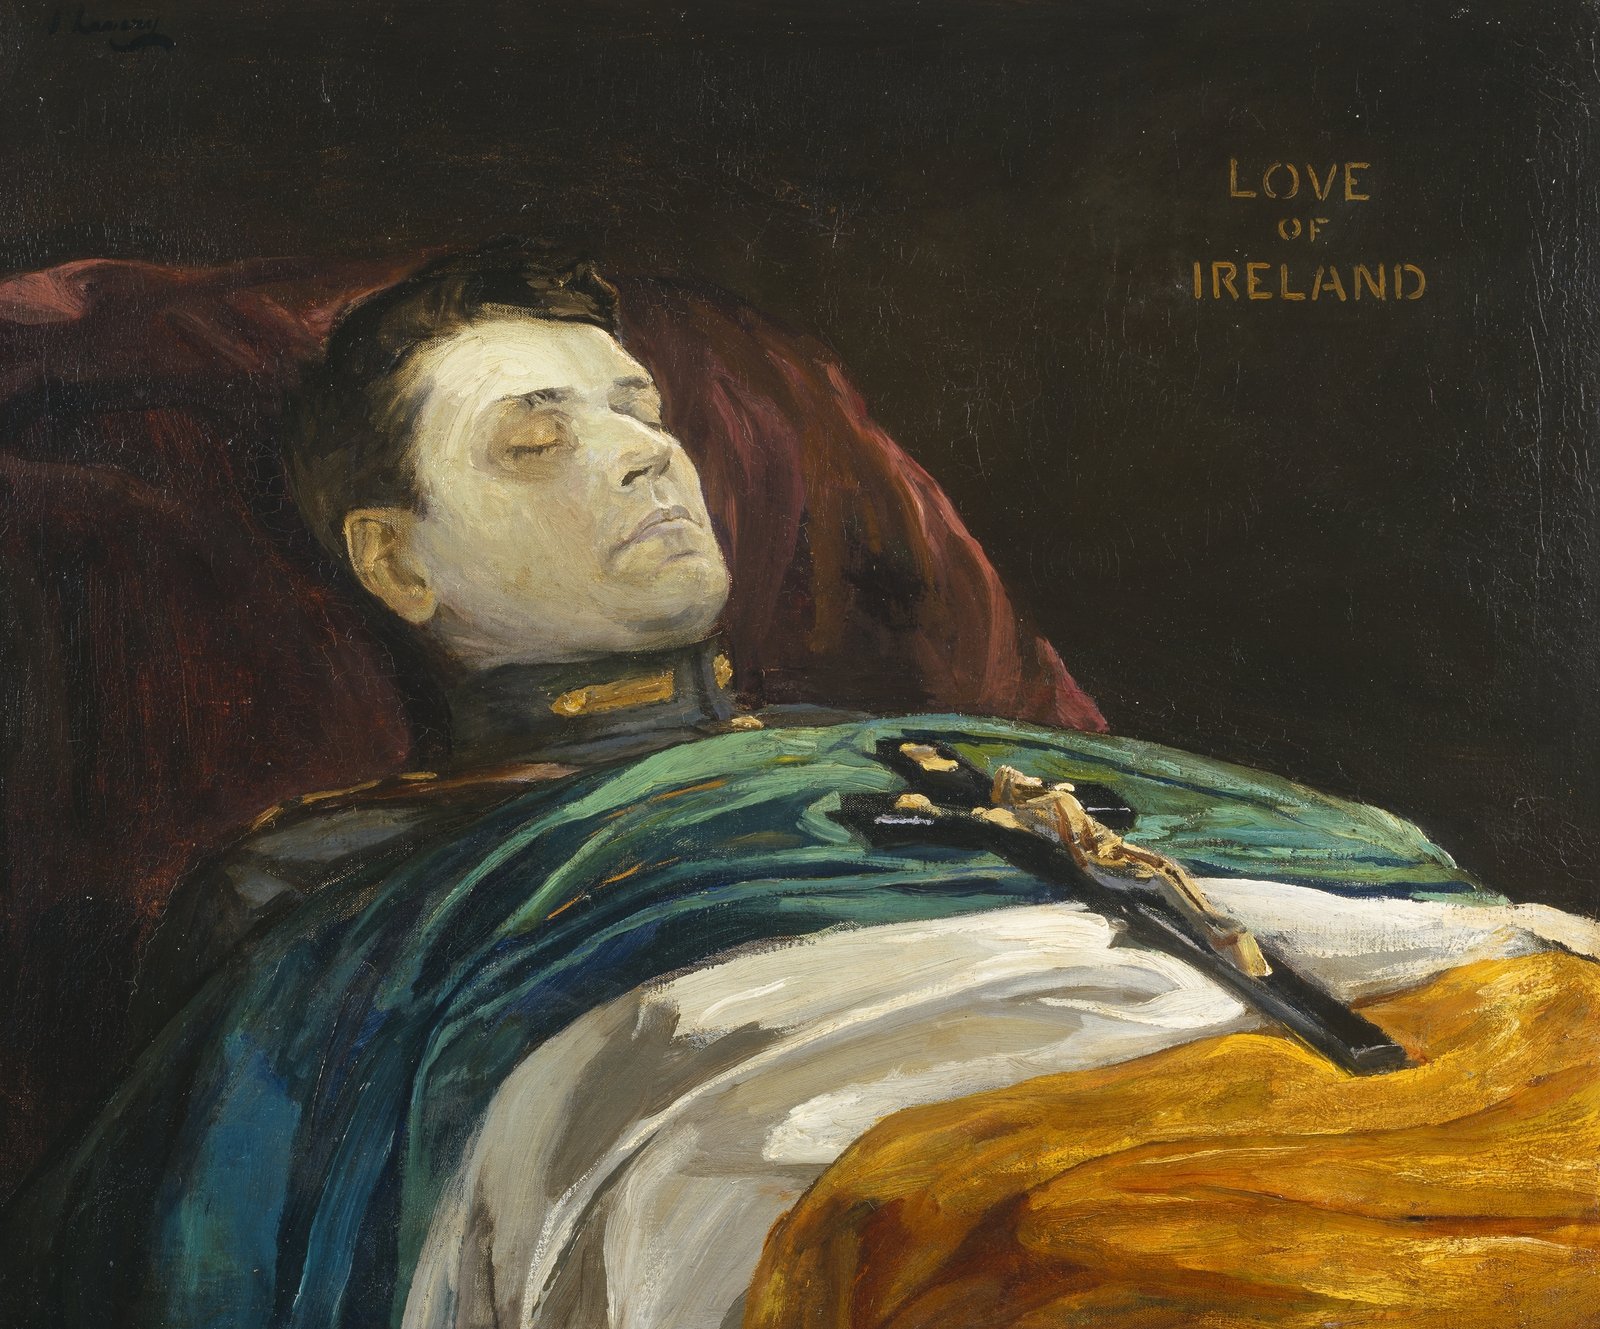 Image - Sir John Lavery's painting of Michael Collins lying in state, 'Love of Ireland' (Pic: Collection and image © Hugh Lane Gallery)